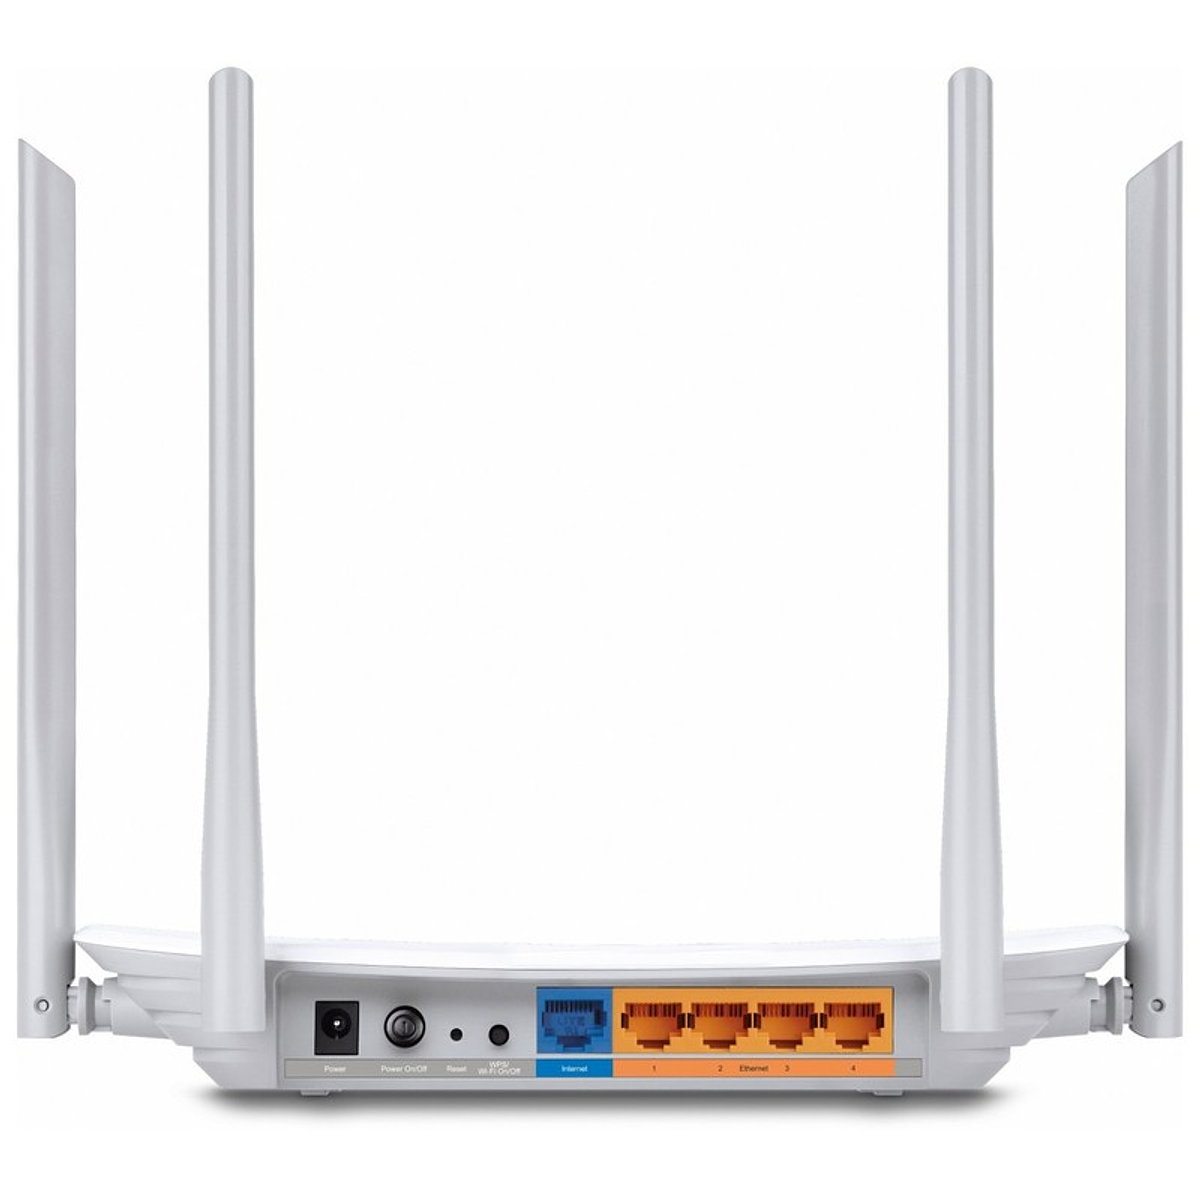 TP-LINK AC1200 Archer C50 V3 Wireless Router